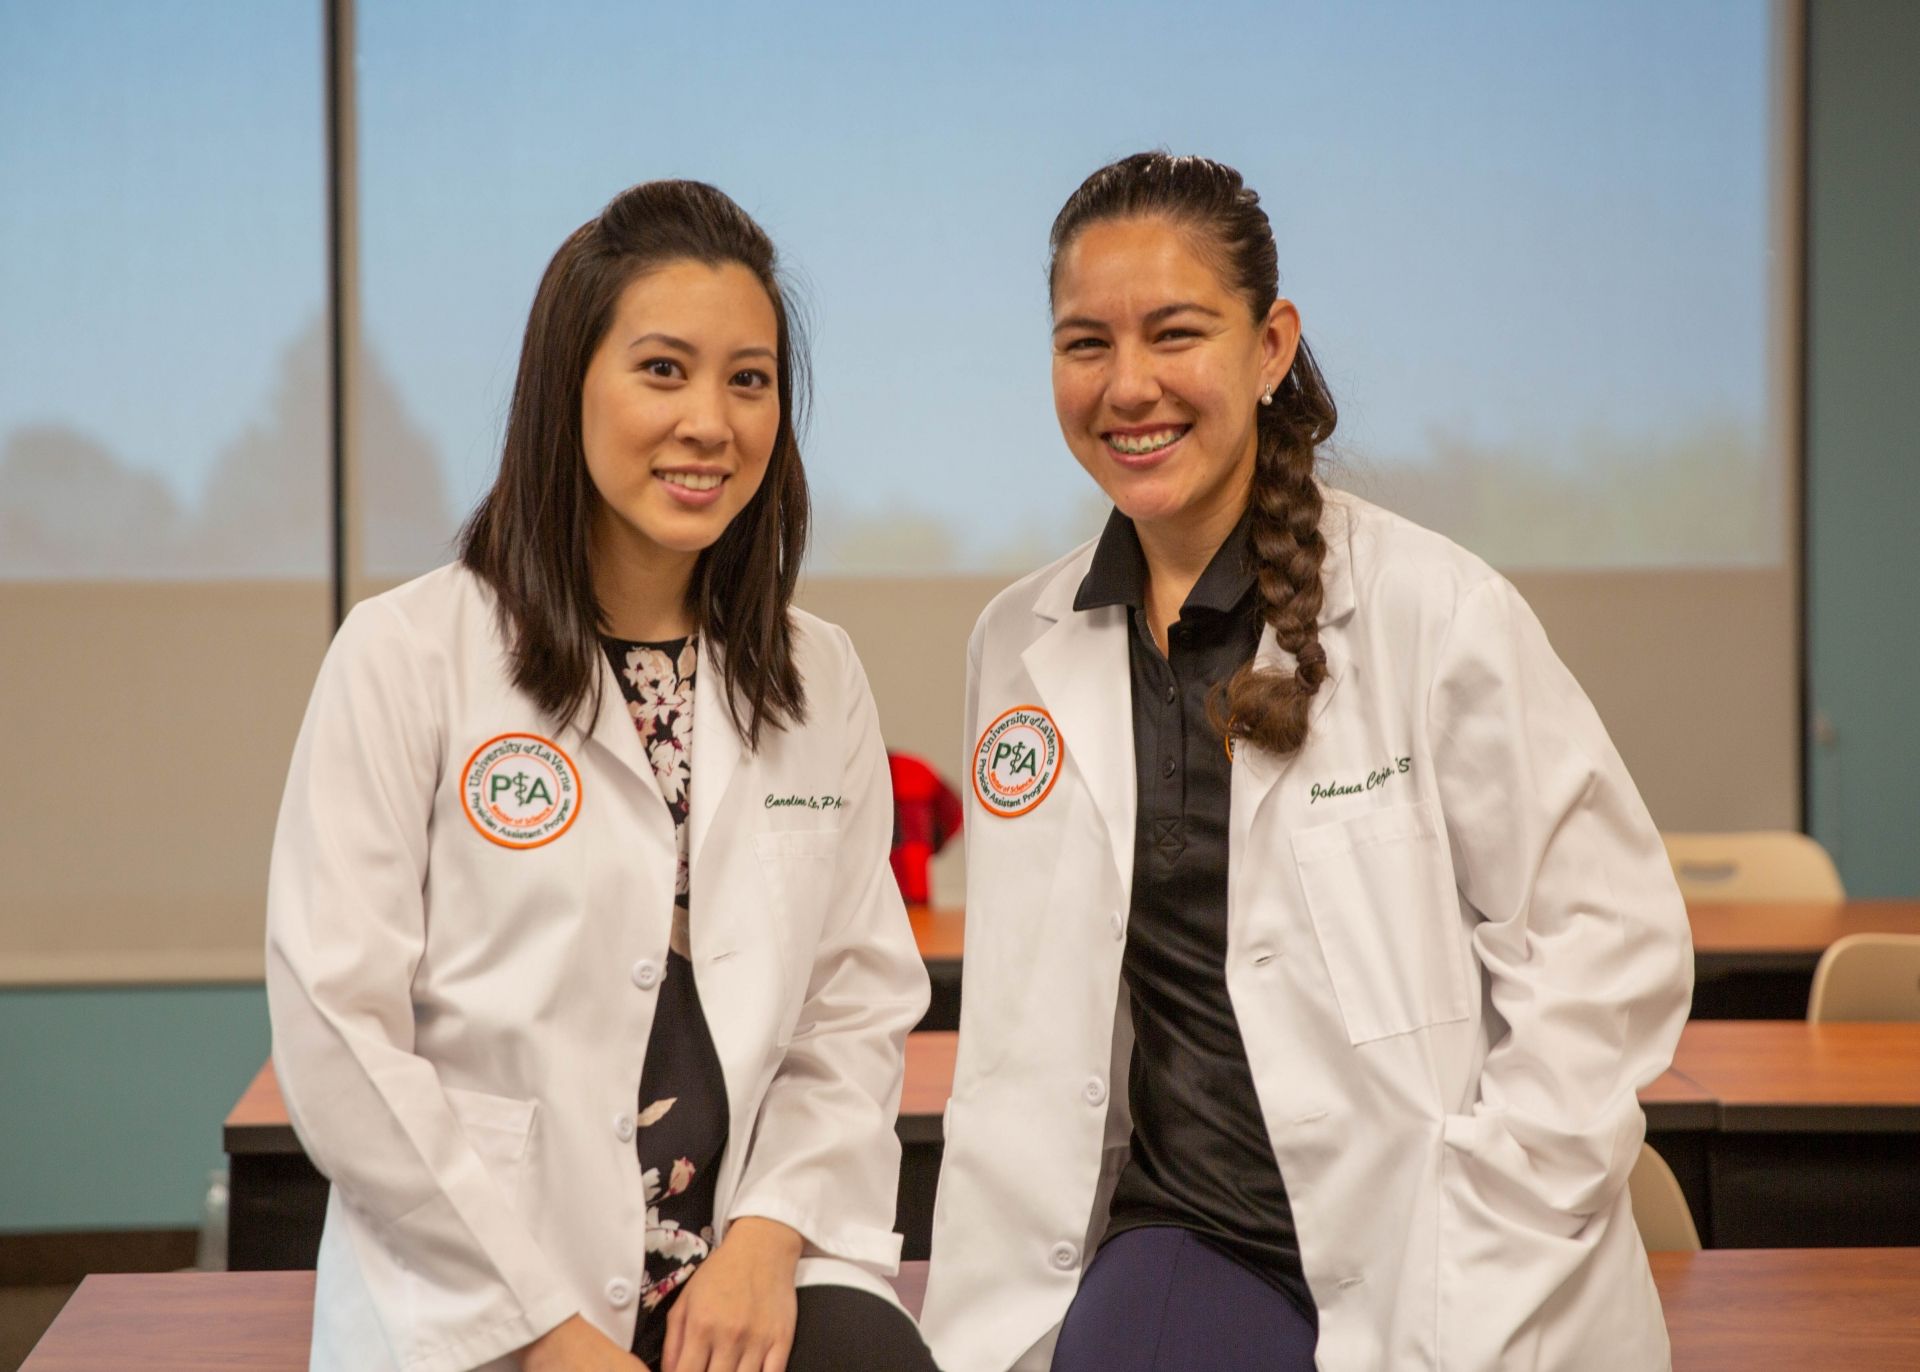 Two female physician assistant students